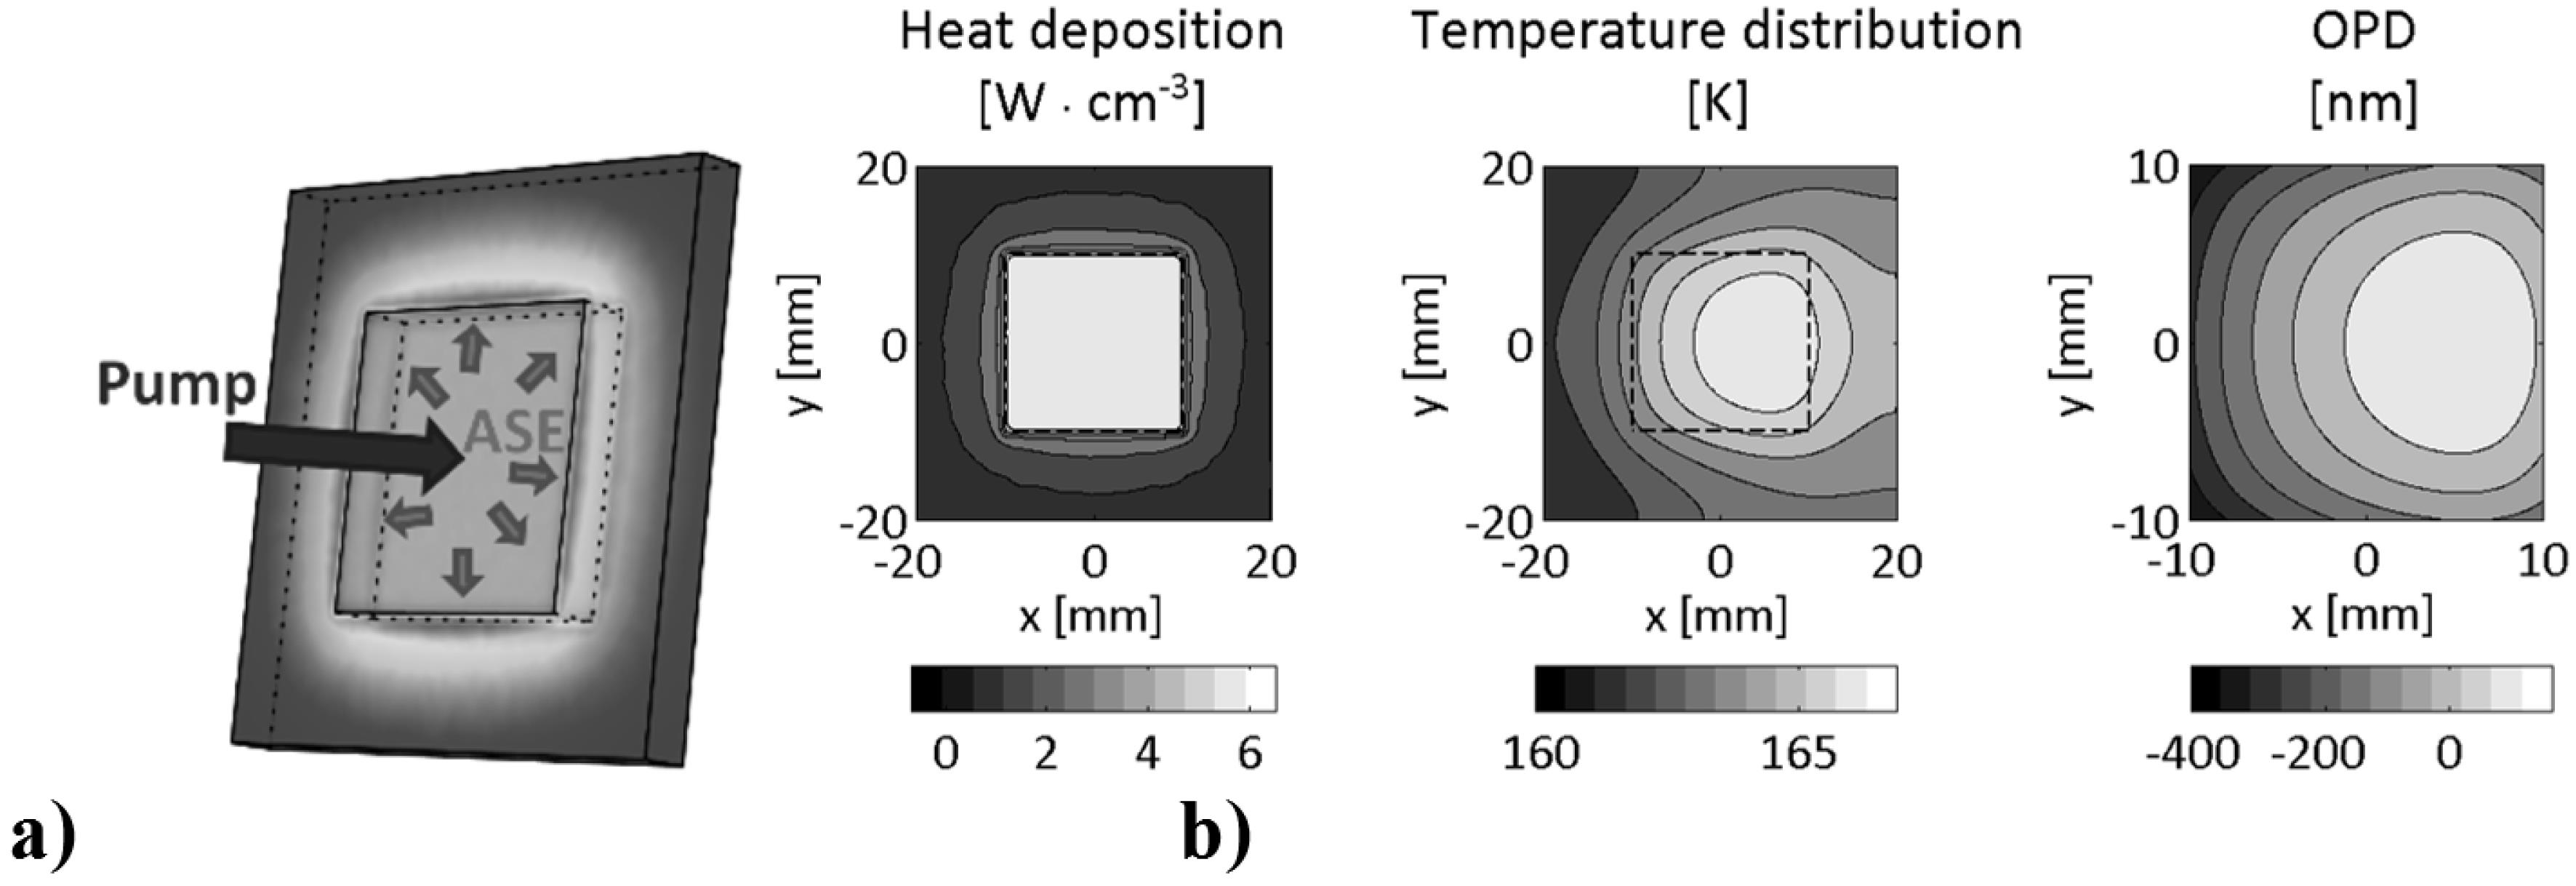 (a) Slab of active media, (b) heat deposition distribution and thermal effects numerical model results in the form of resulting temperature and OPD distributions.